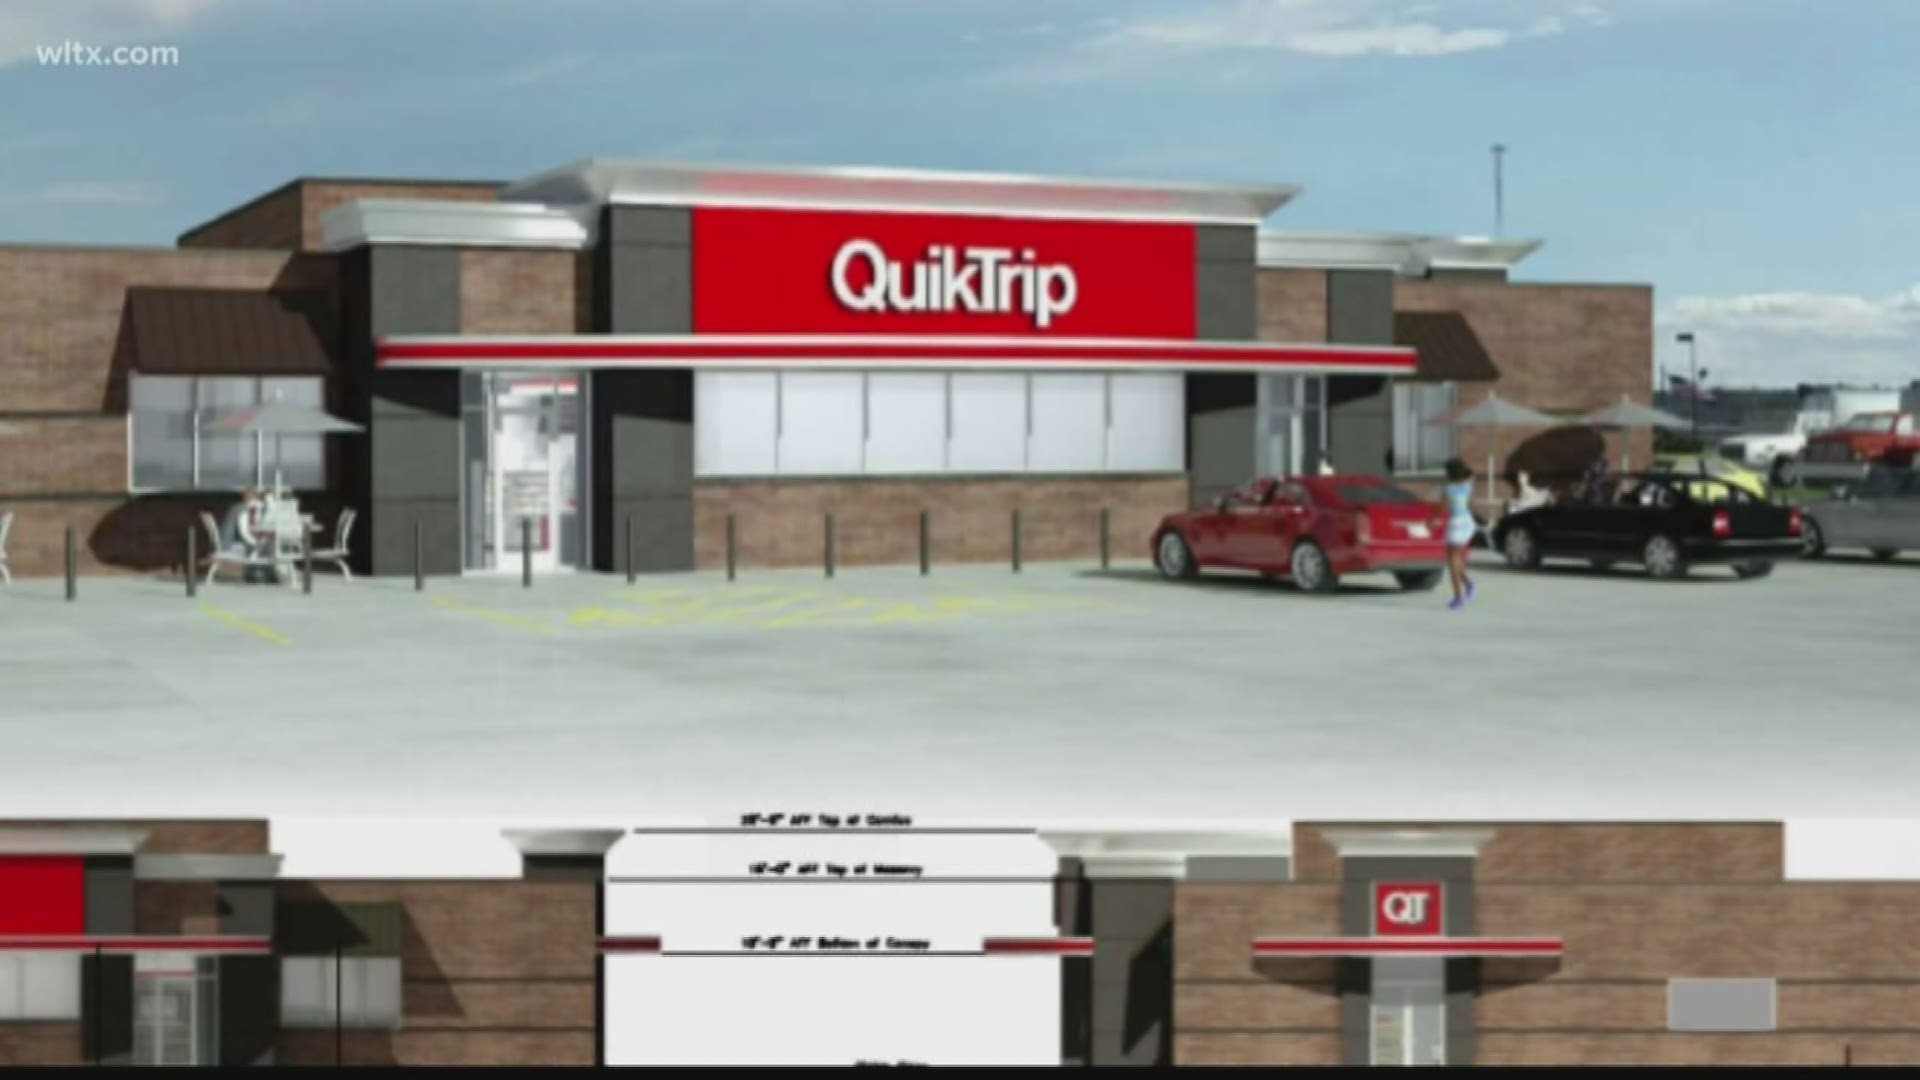 The Town of Lexington and officials have released an image giving us a first look of what the QT gas station will look like at this location.